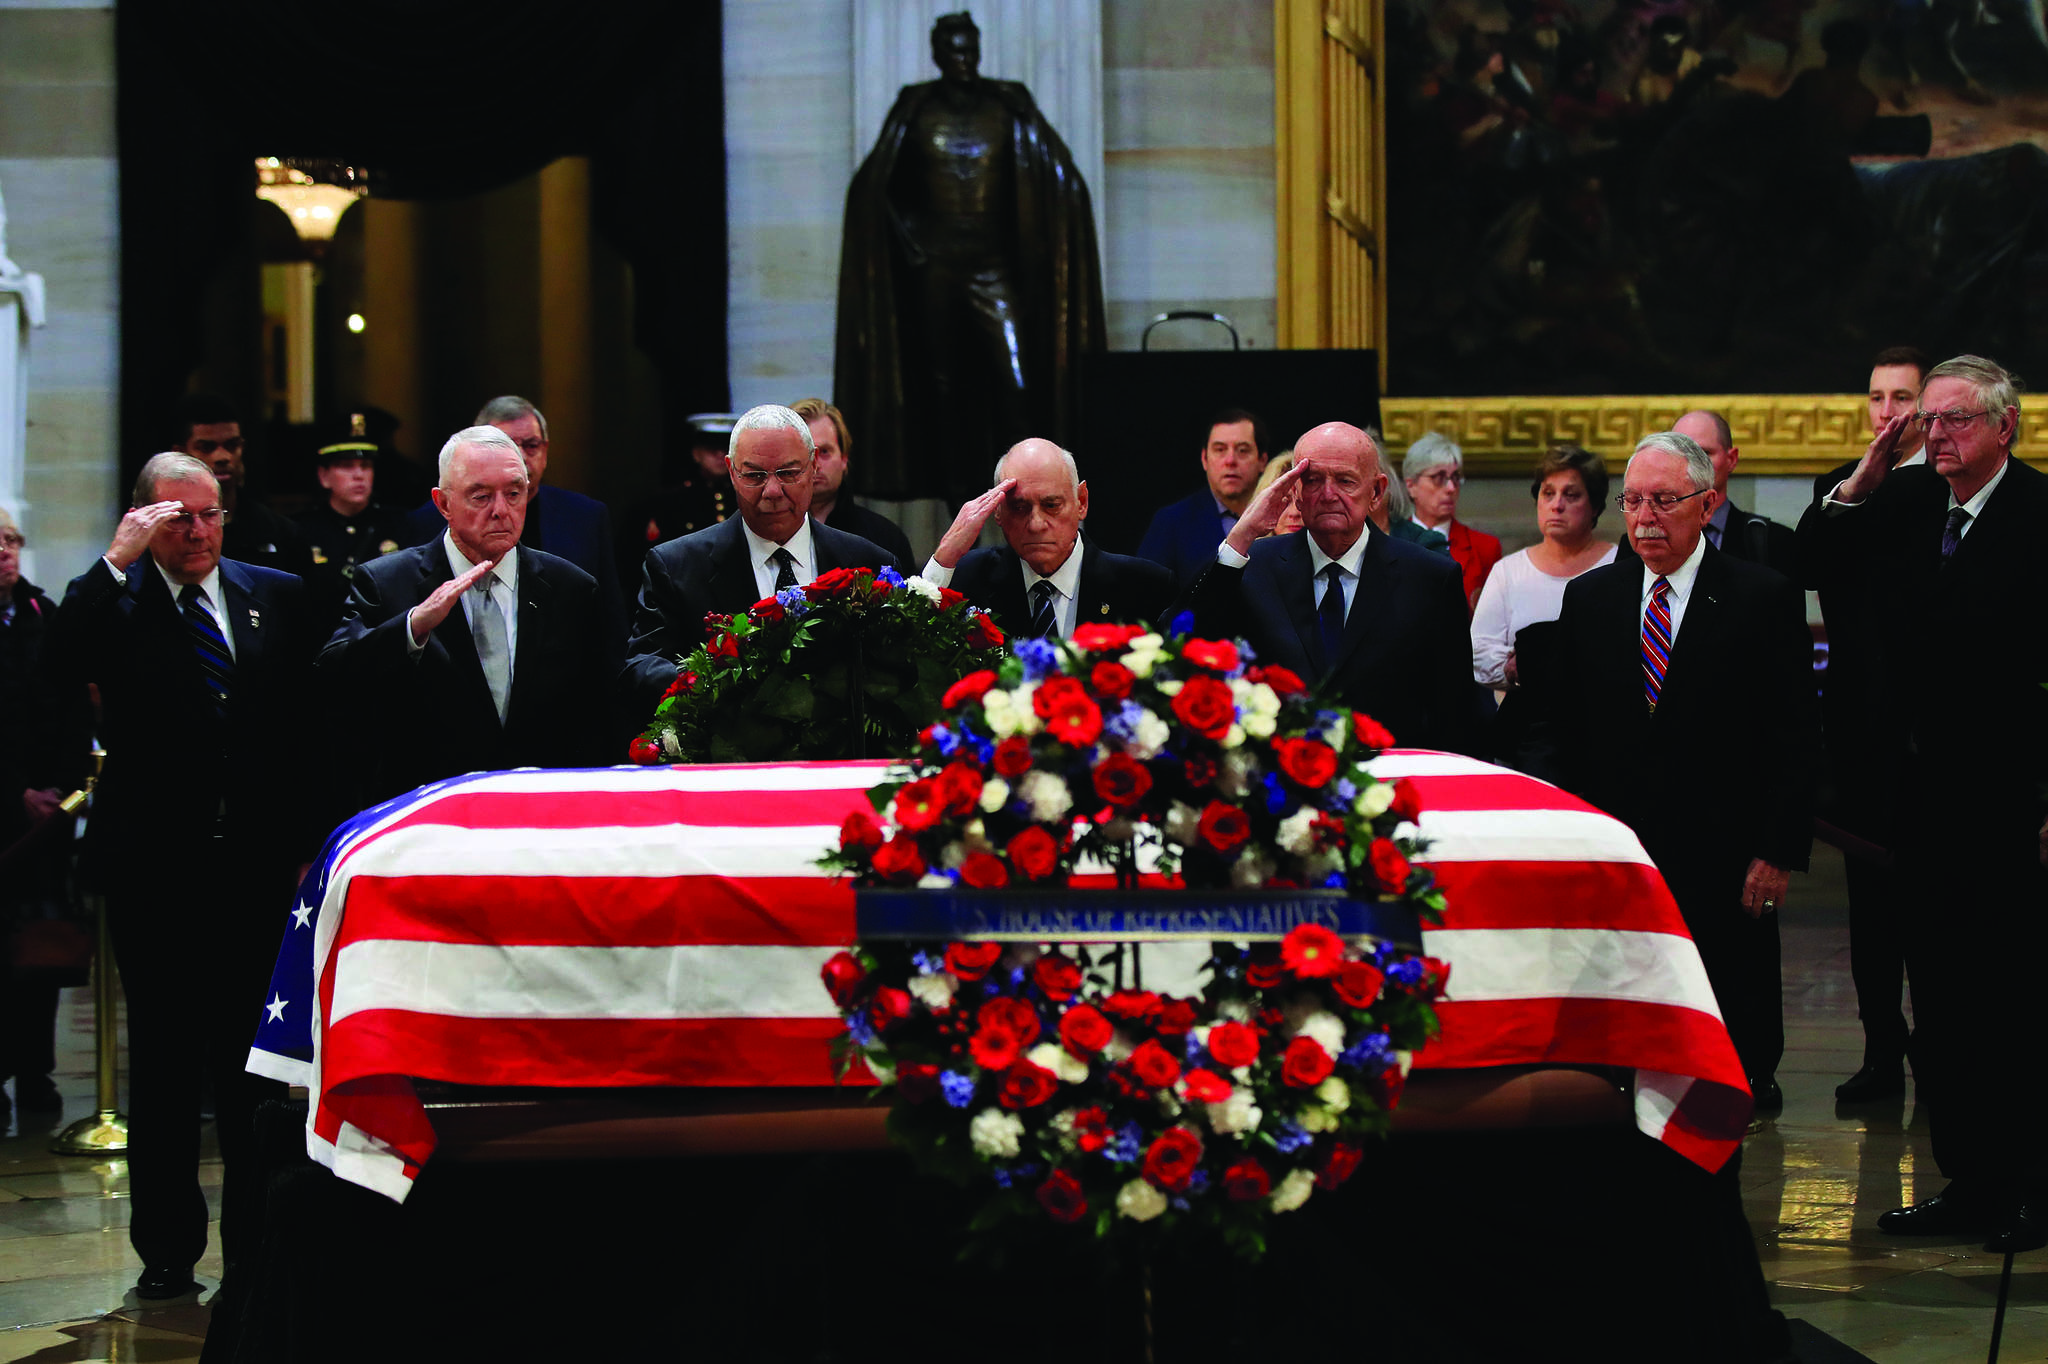 Former Secretary of State Colin Powell, third from left, leads former Operation Desert Storm commanders as they pay their last respects to former President George H.W. Bush as he lies in state at the U.S. Capitol in Washington, Tuesday, Dec. 4, 2018. (AP Photo/Manuel Balce Ceneta)